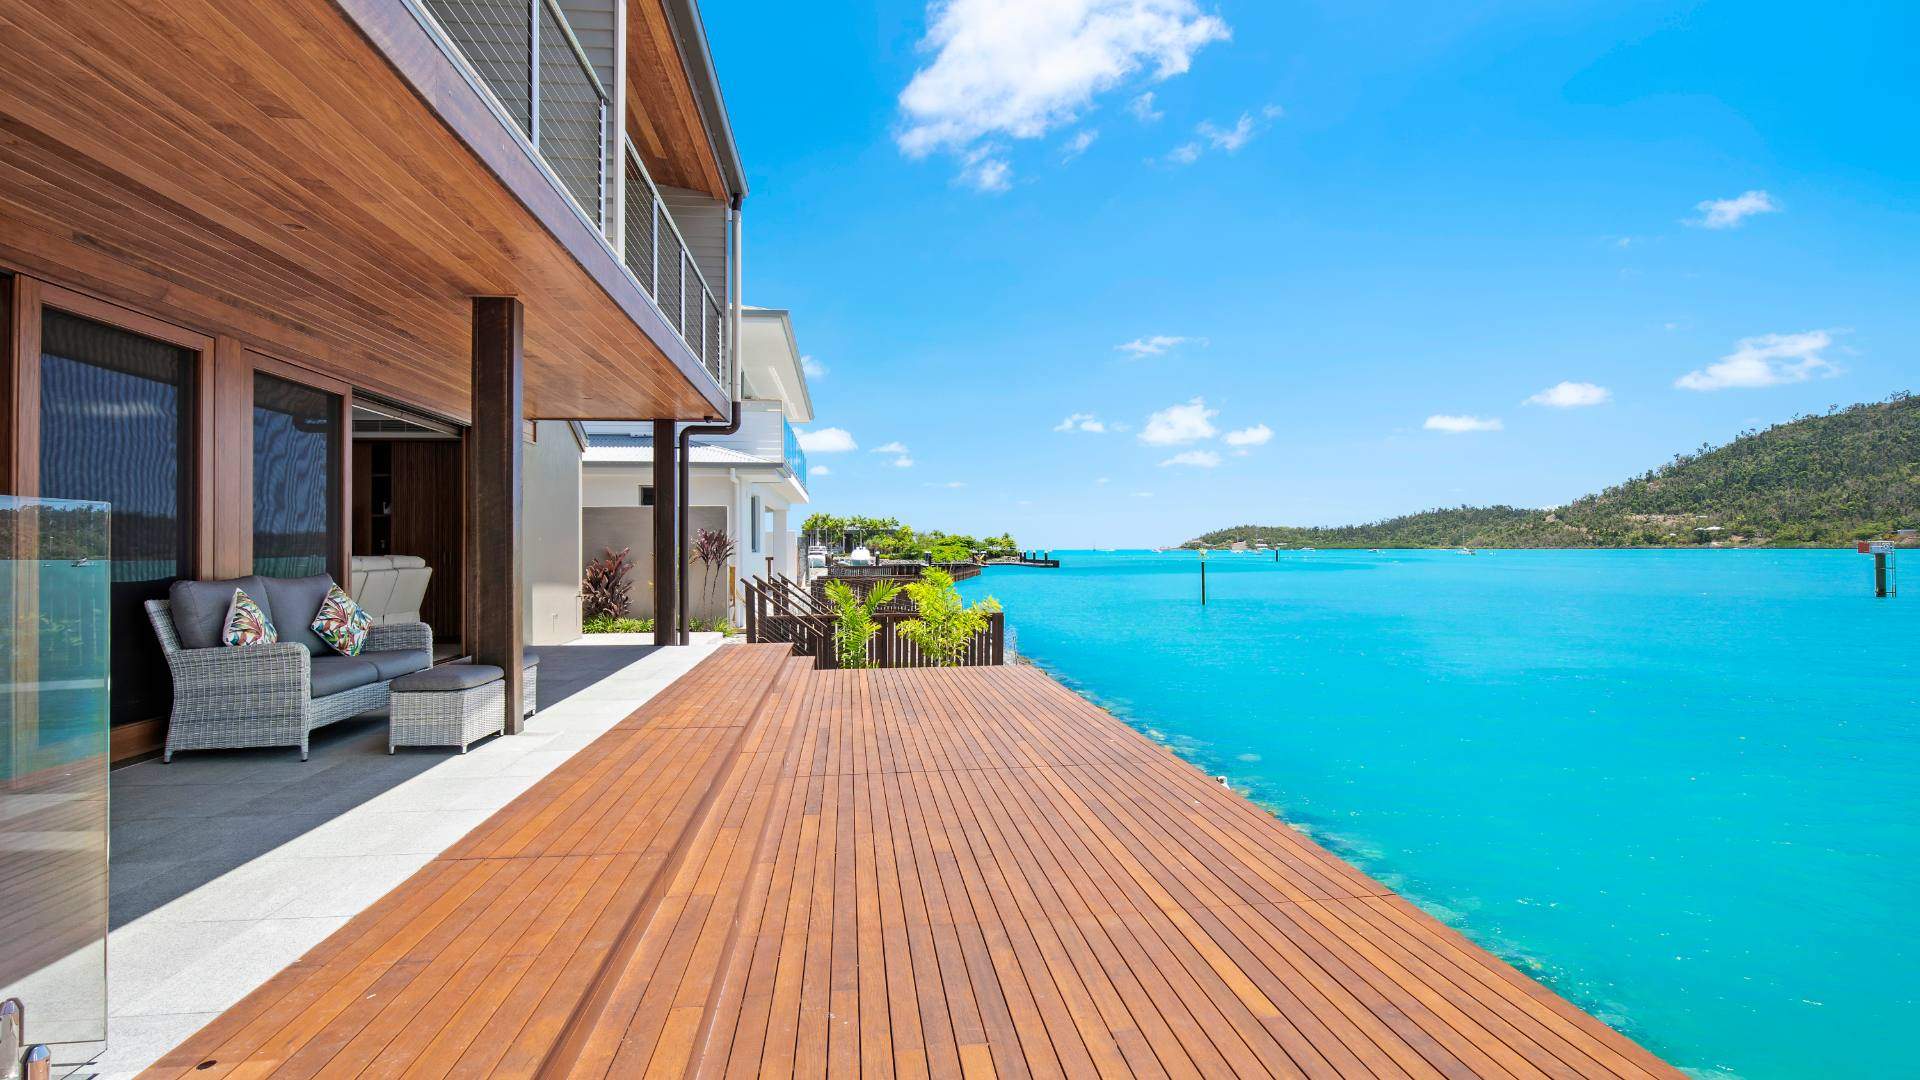 The Most Idyllic Island Getaways You Can Book in Queensland